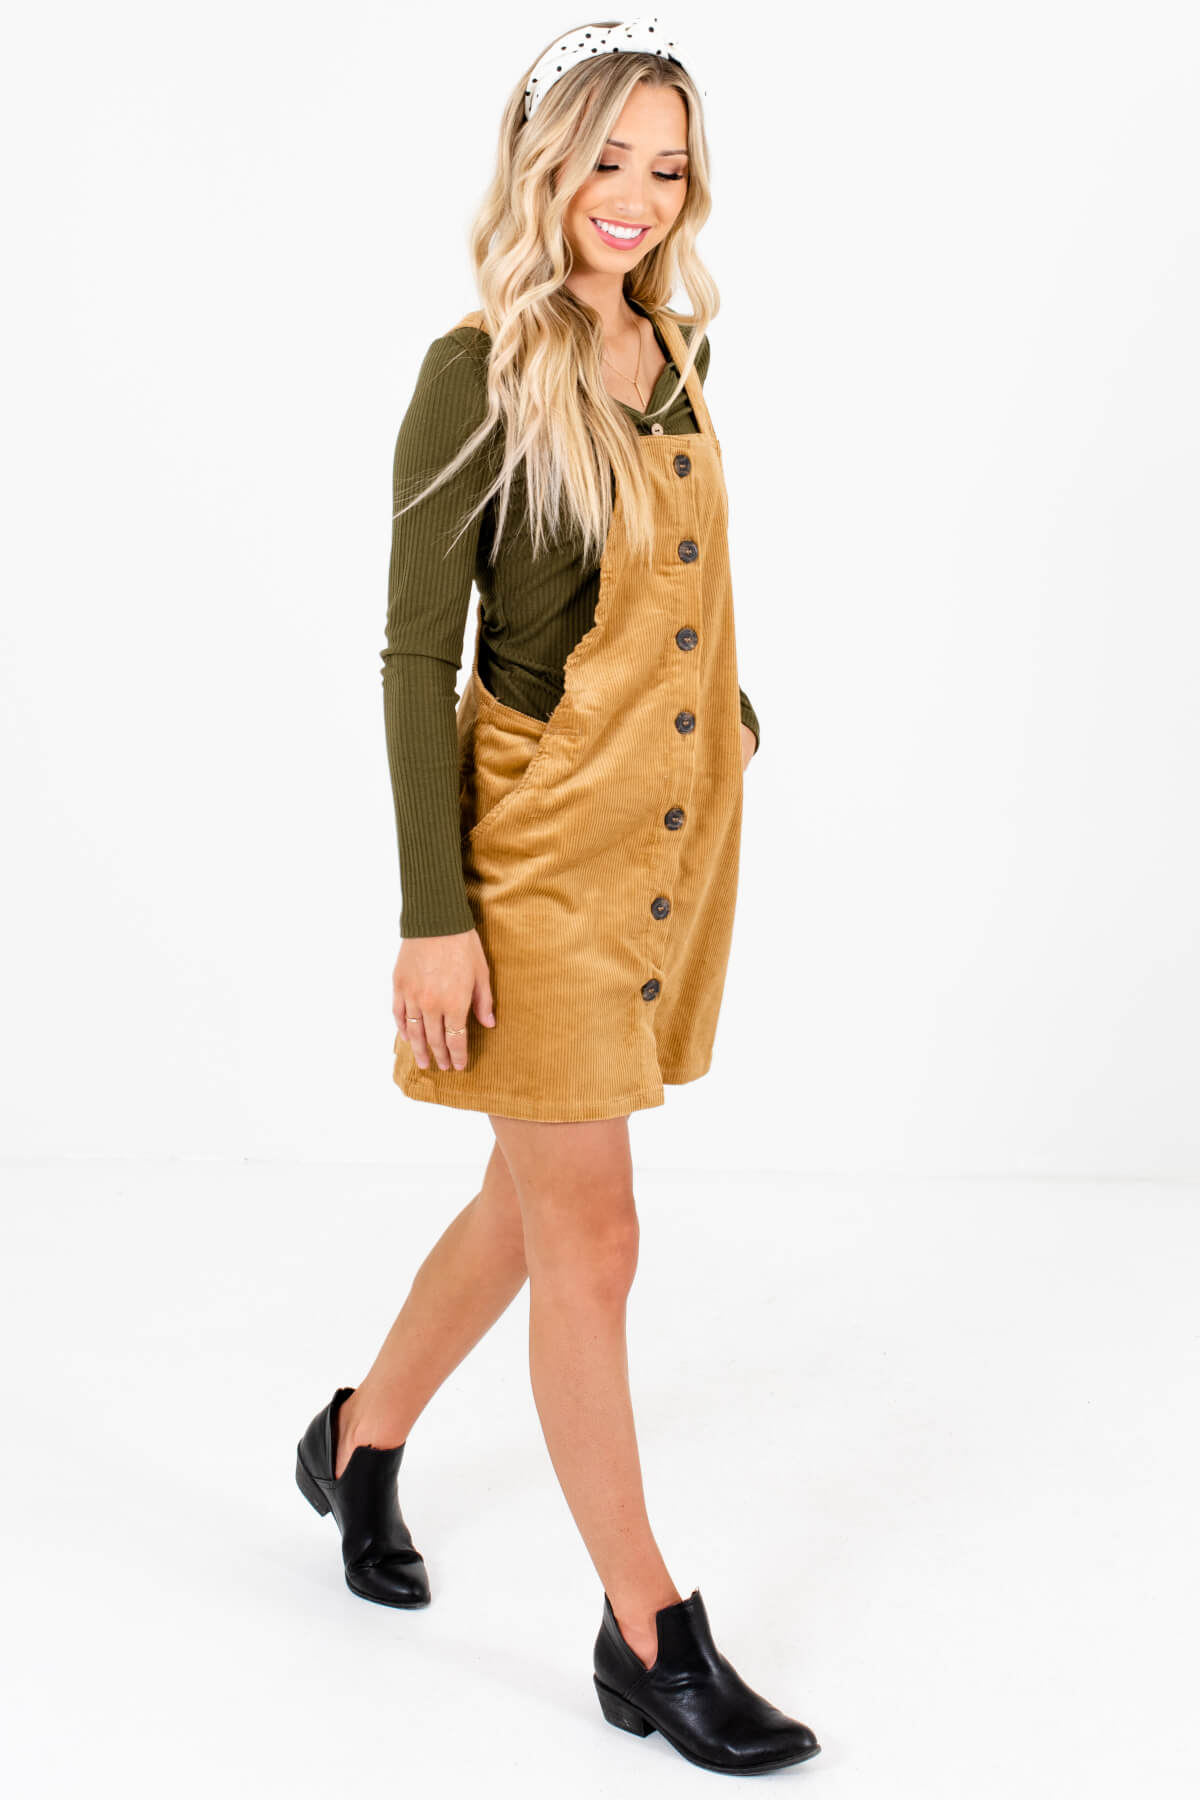 Camel Brown Cute and Comfortable Boutique Mini Dresses for Women